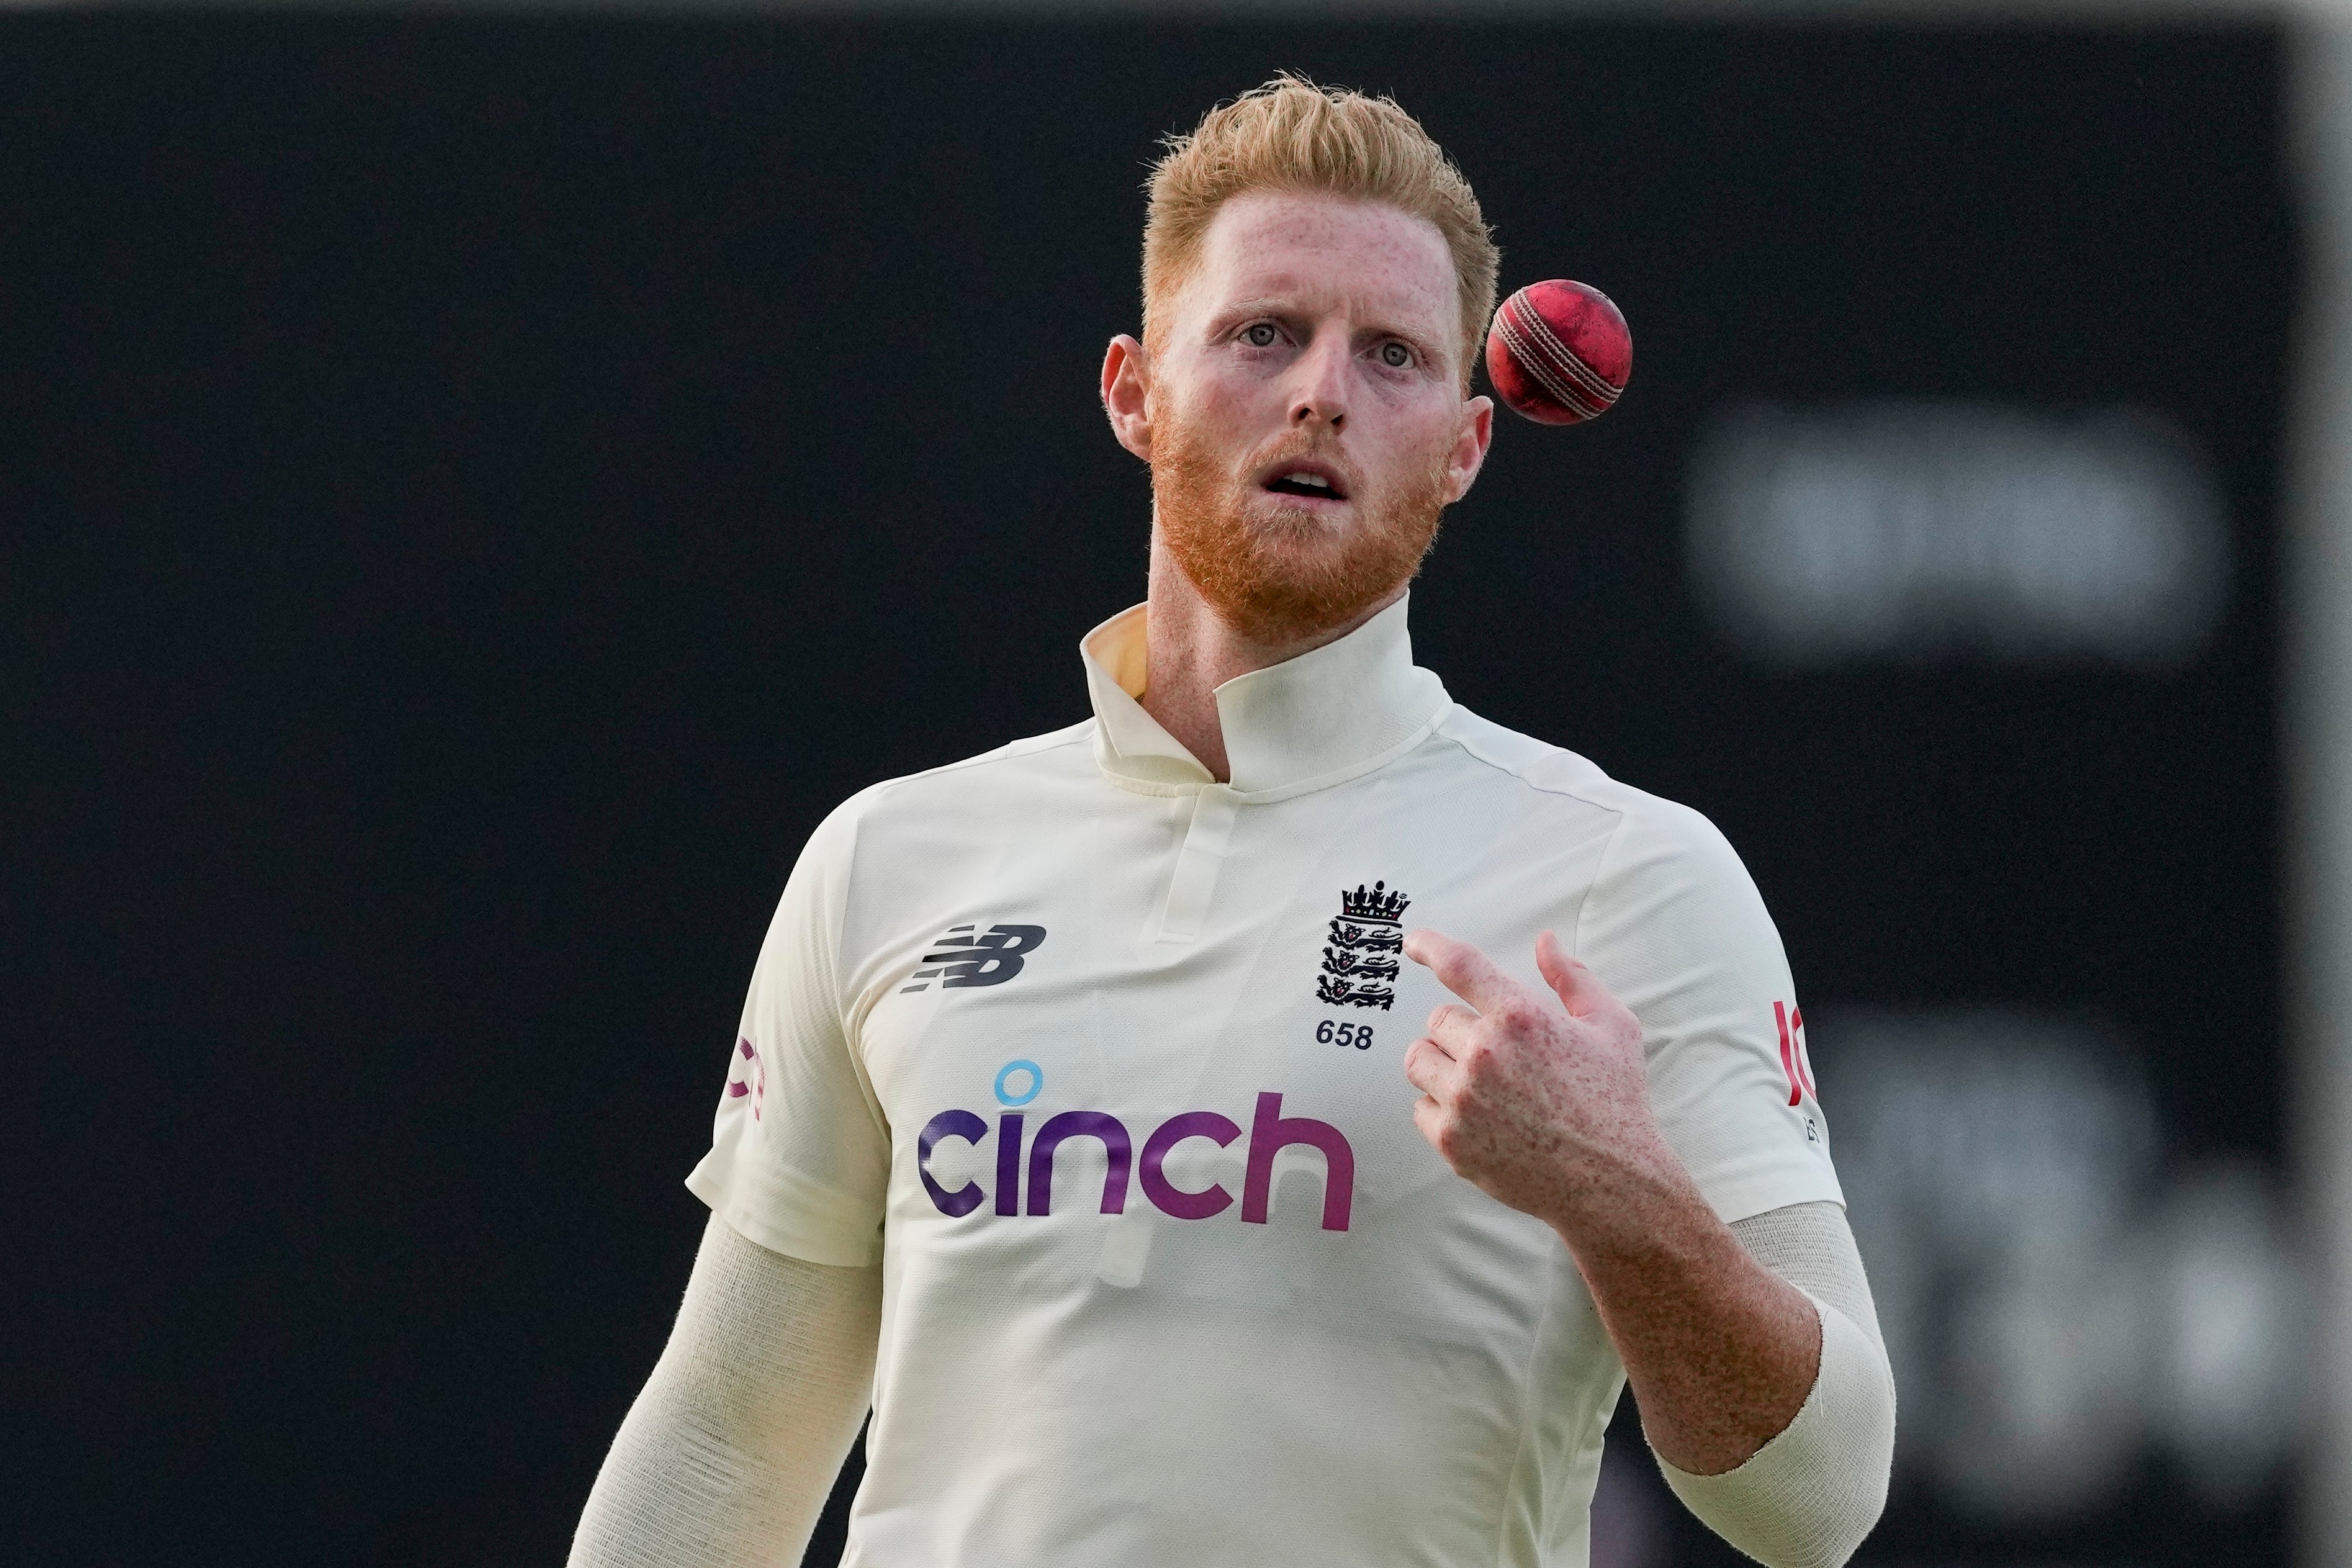 Ben Stokes has been nominated as the man to take England’s red-ball team forward